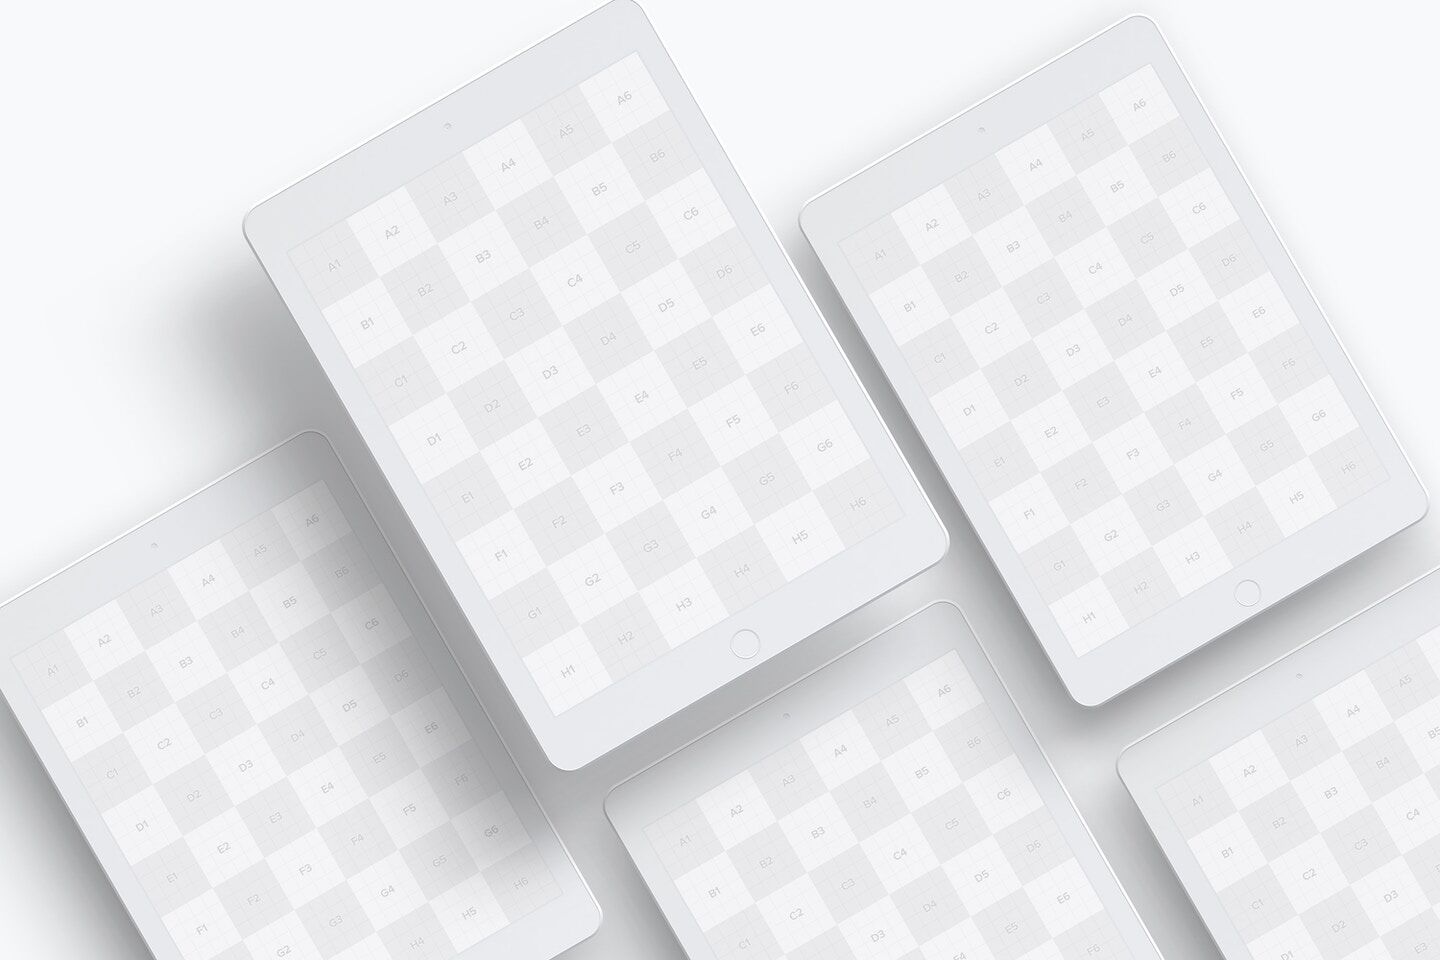 Mockup Displaying Top View of a Grid of iPad 9.7 FREE PSD